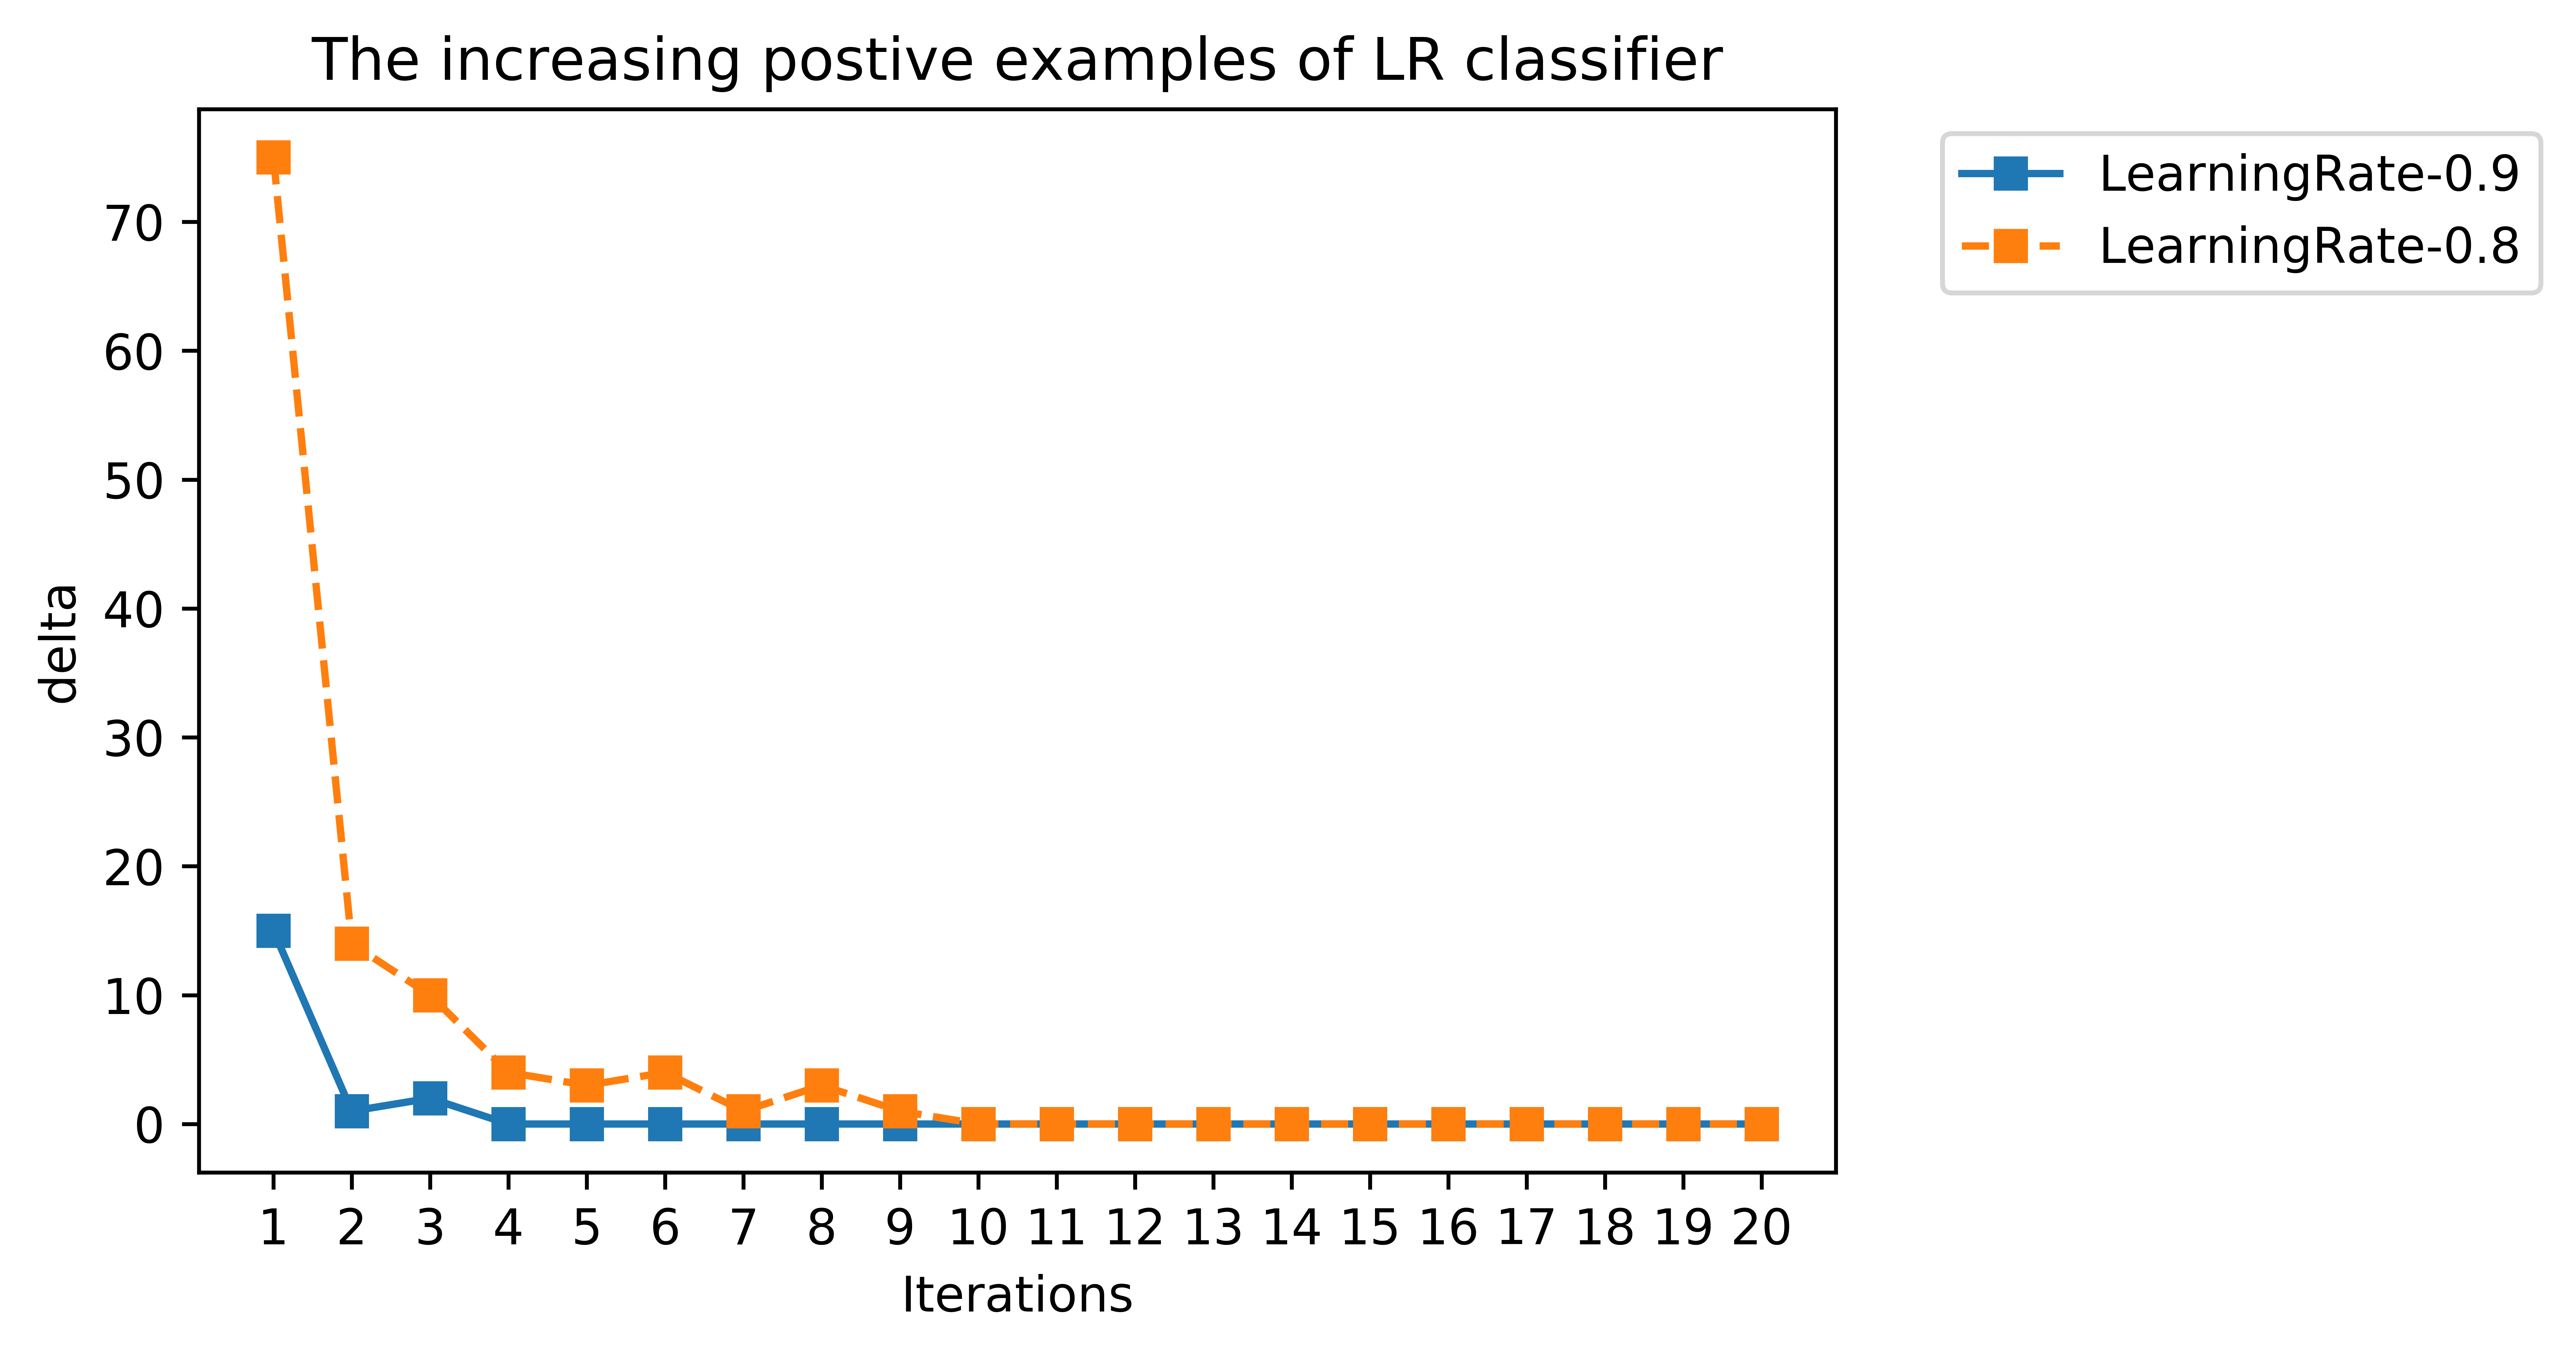 The increasing positive examples of LR classifier